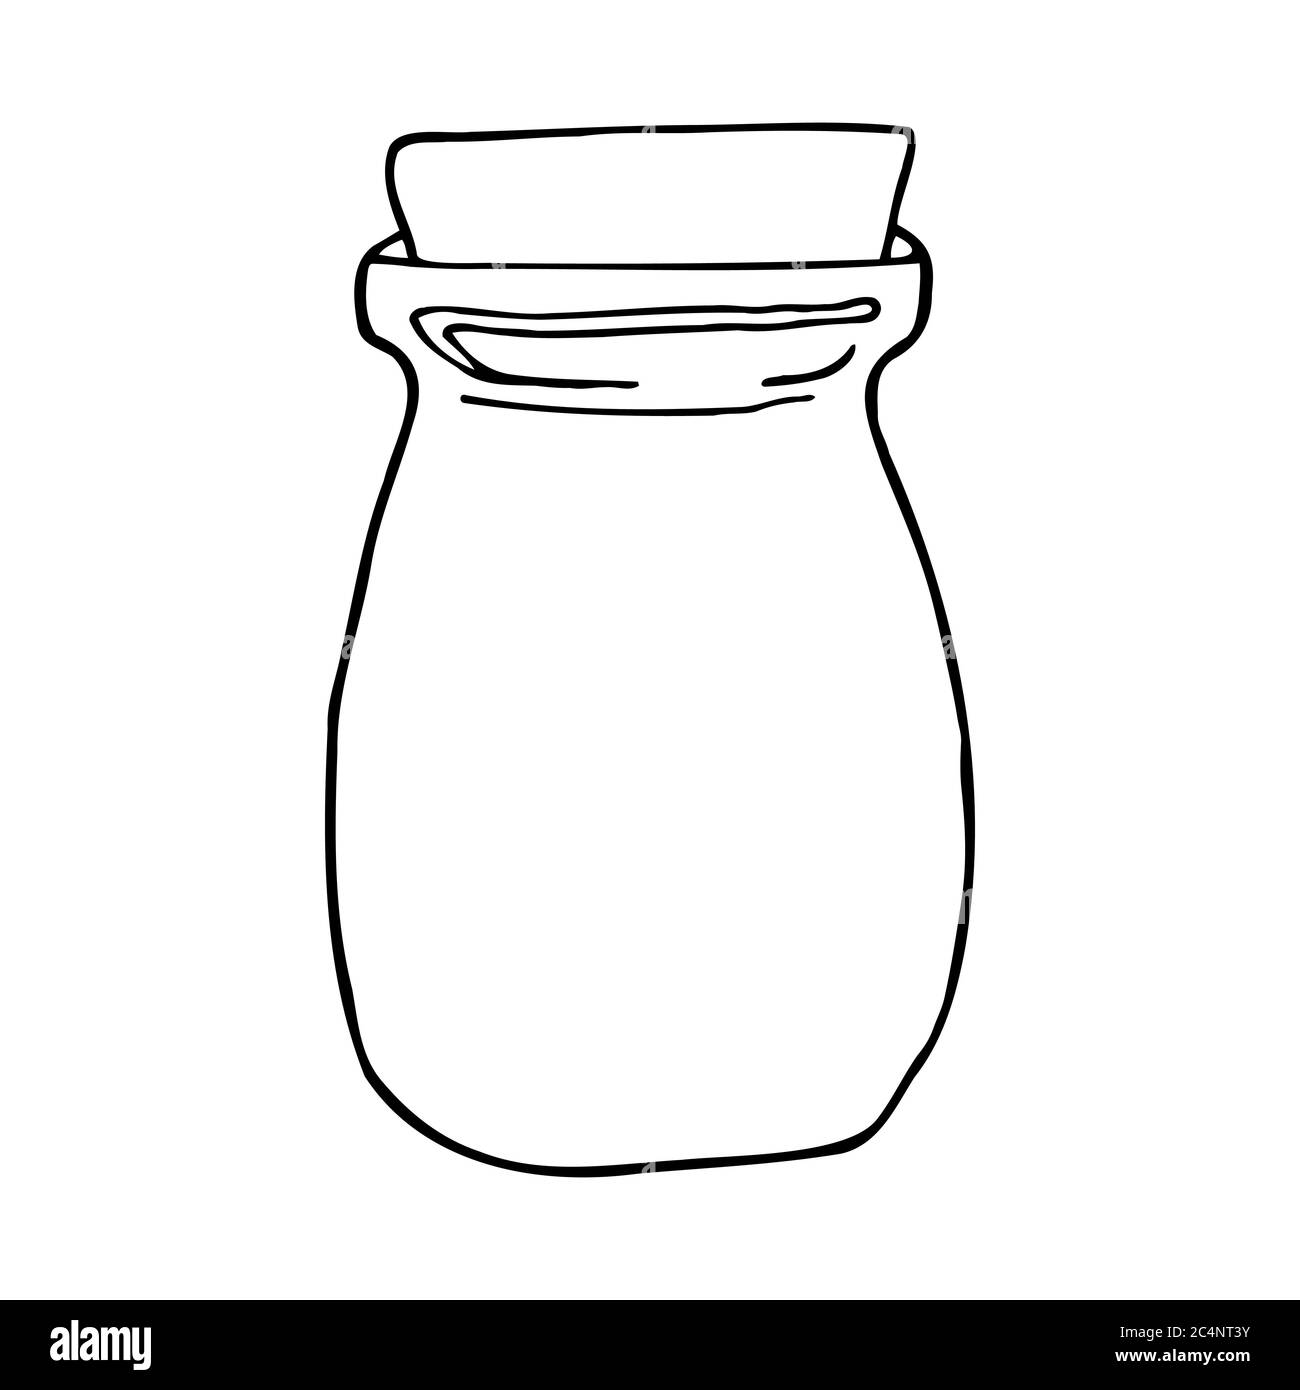 Hand drawn jar. Contour sketch. Kitchen objects doodle style. Vector illustration isolated on white background. Alchemy and vintage. Stock Vector